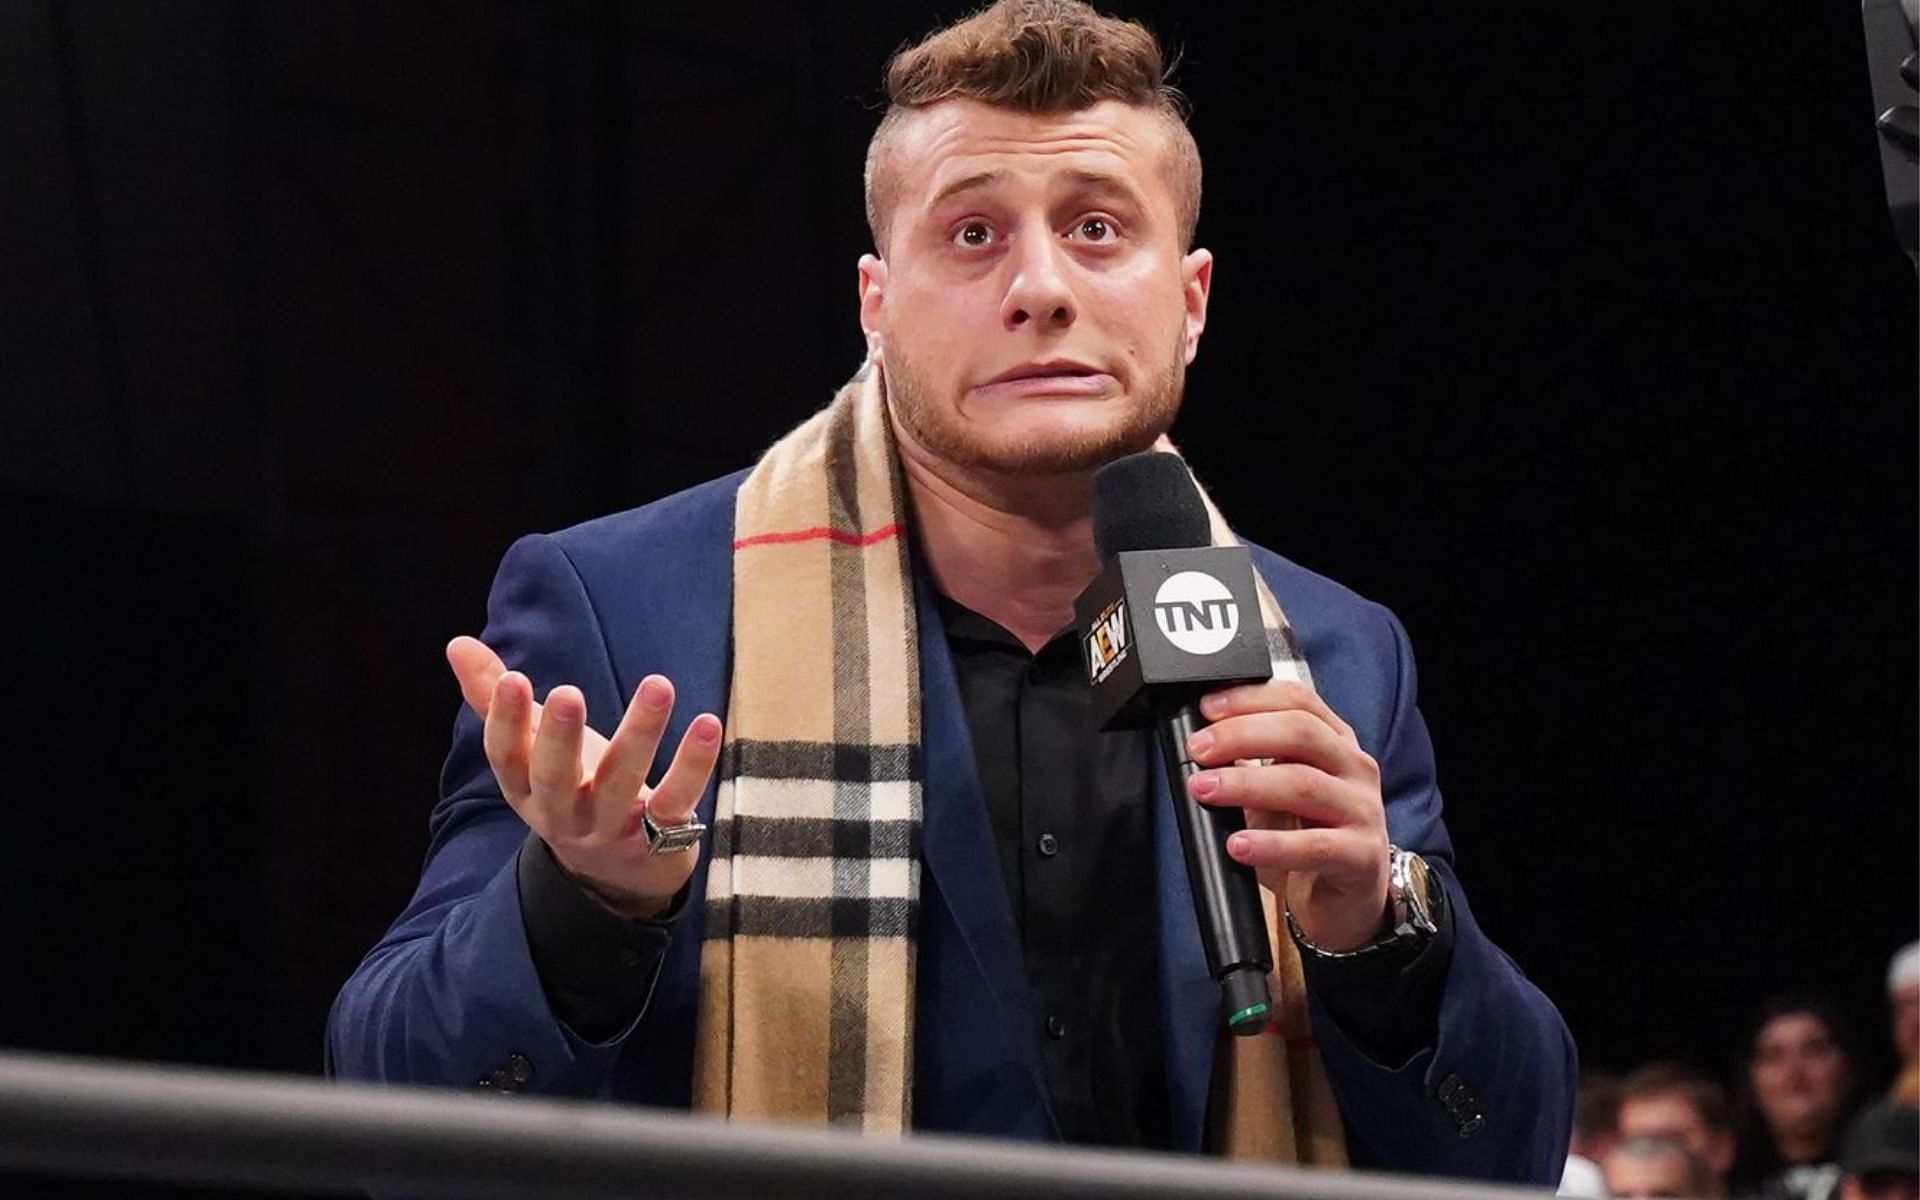 MJF is the youngest AEW World Champion